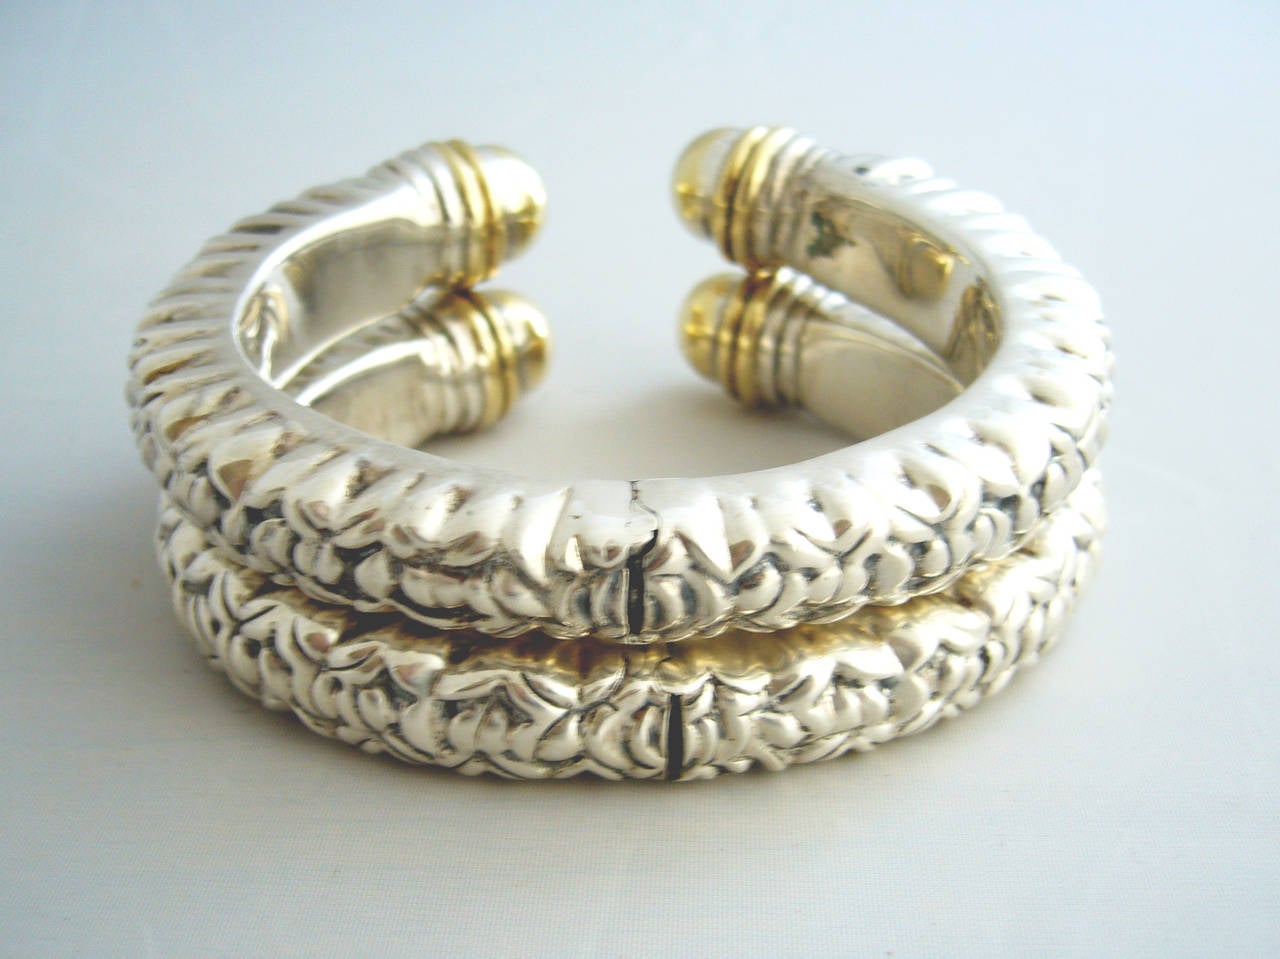 A pair of Bill Blass rope or cable style bracelets circa 1980's.  Bracelets are hinged at the back for comfort when putting them on. The are heavy, weighing a total of  195.5 grams and are made of sterling silver with 18k gold accents.  Made for a